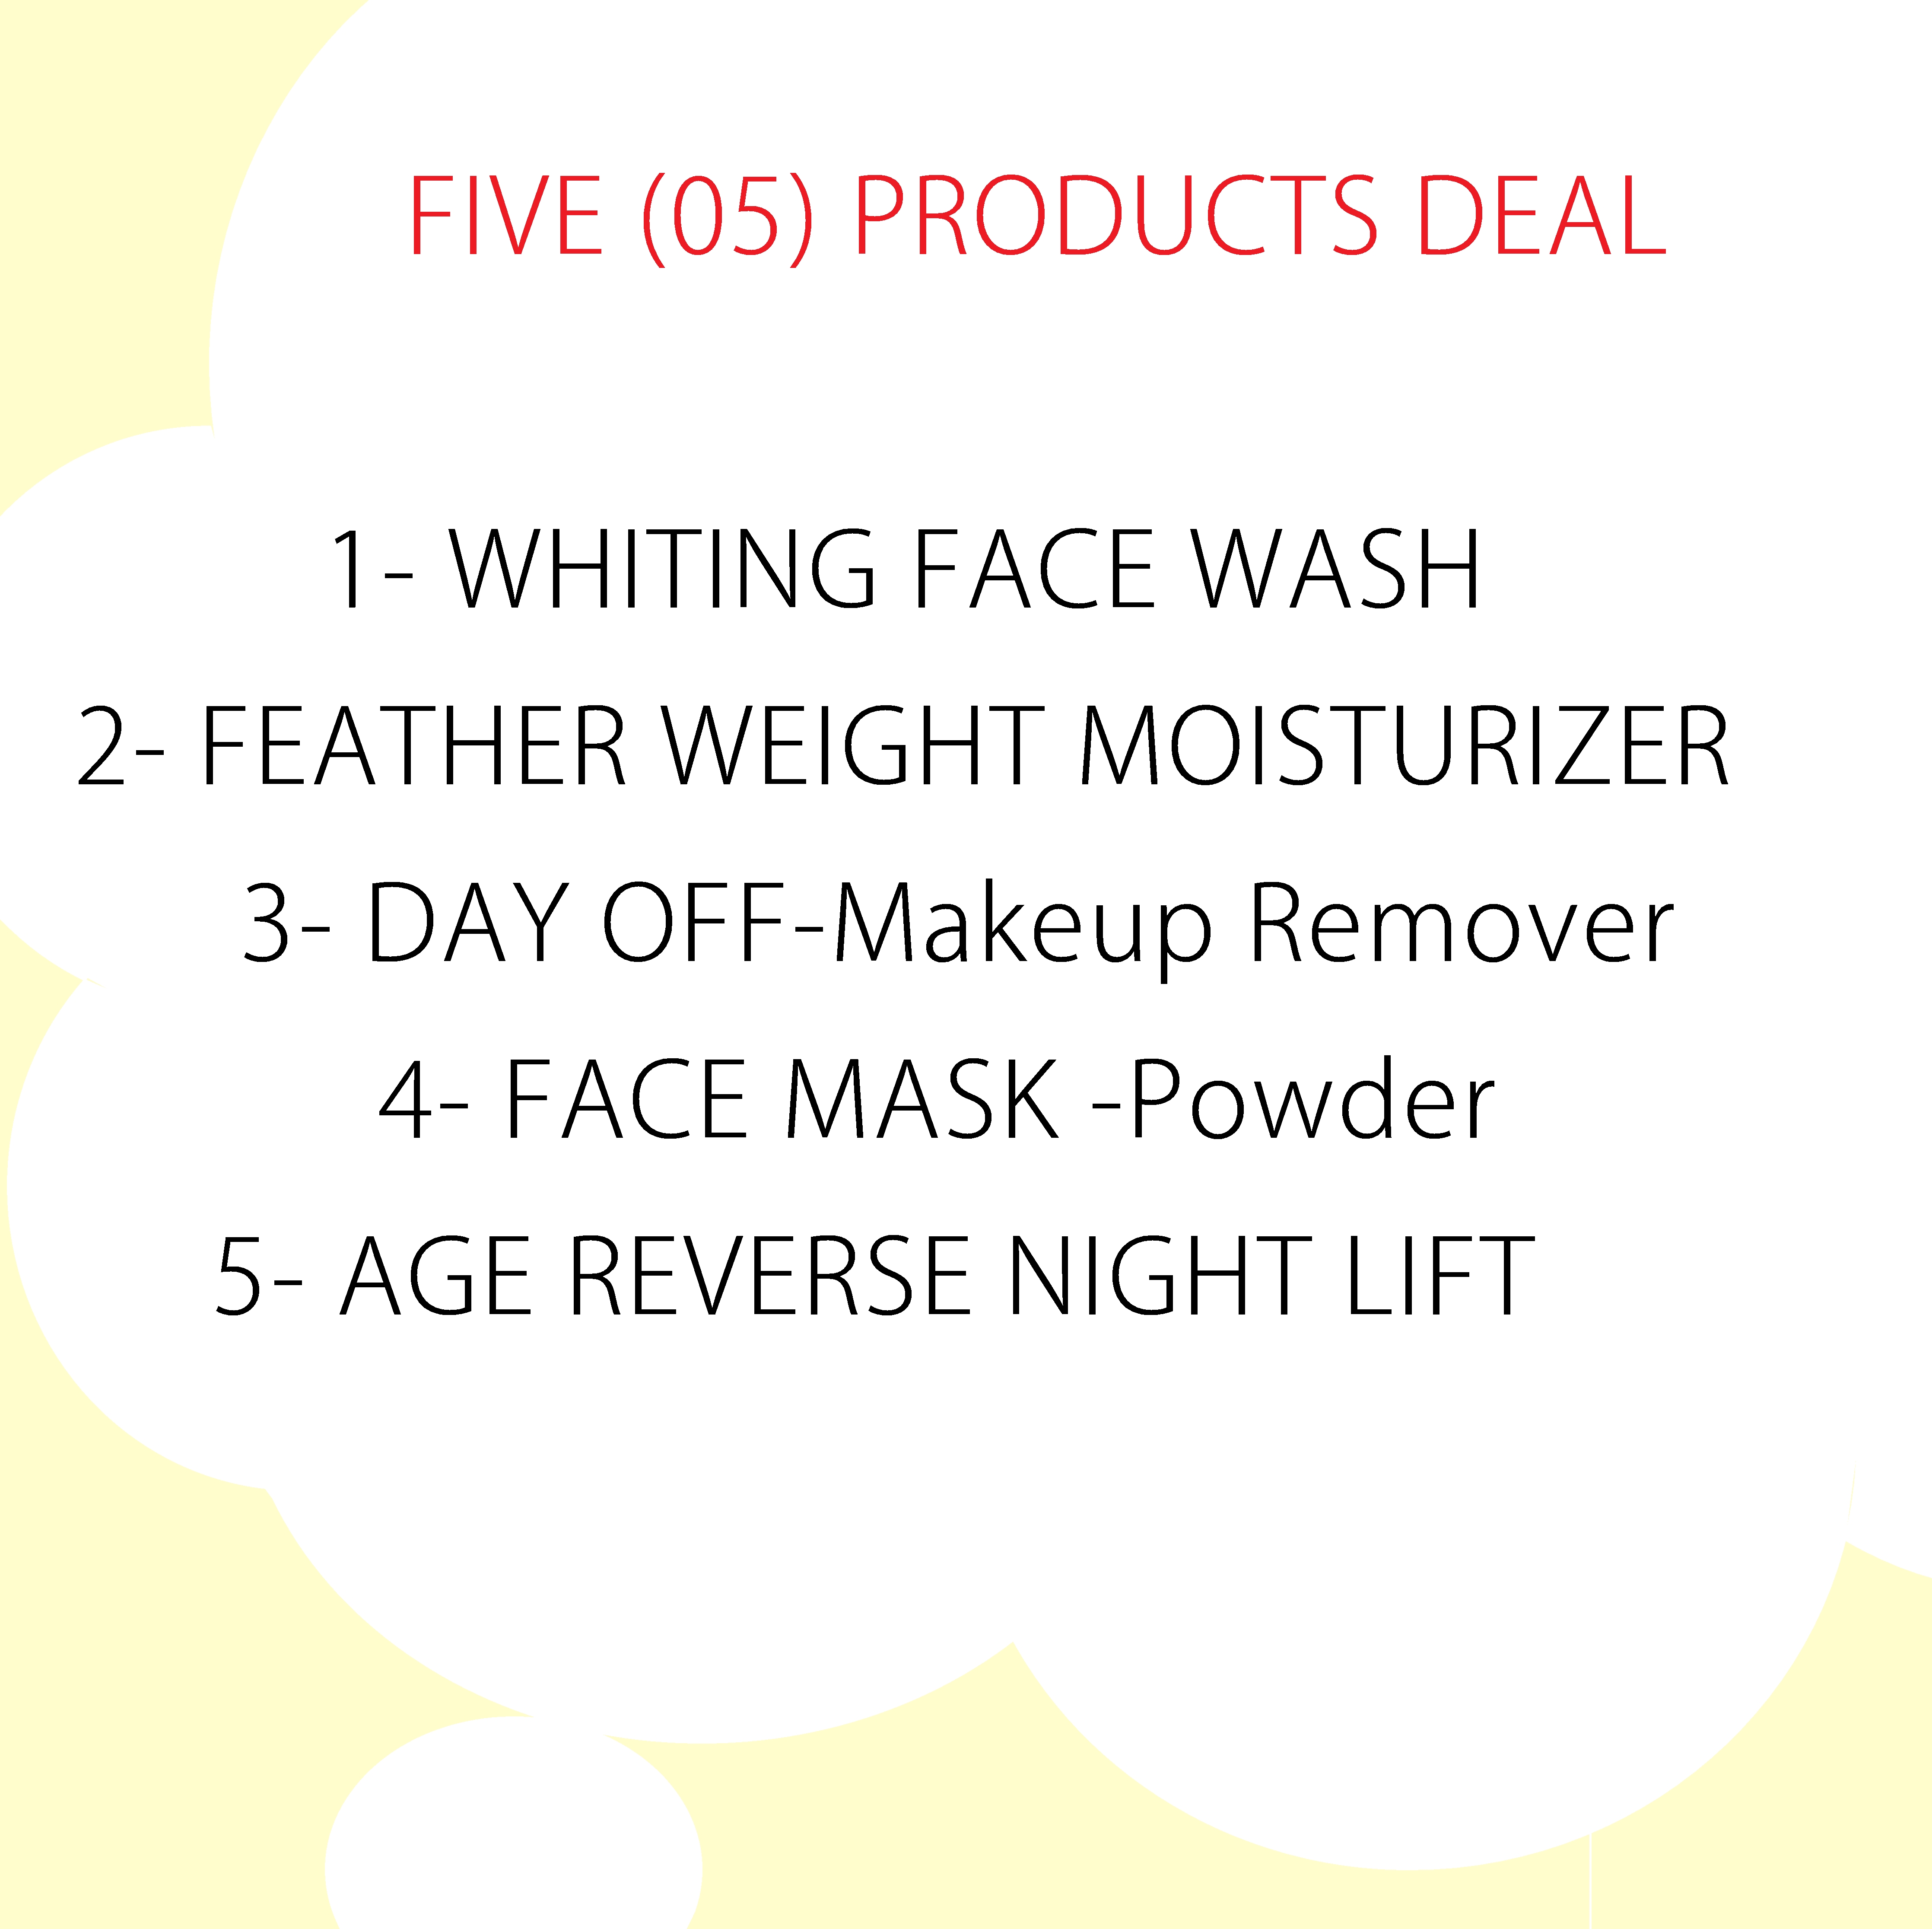 WHITINING SKIN - SUMMER FEMALE ABOVE 30 YEARS DEAL